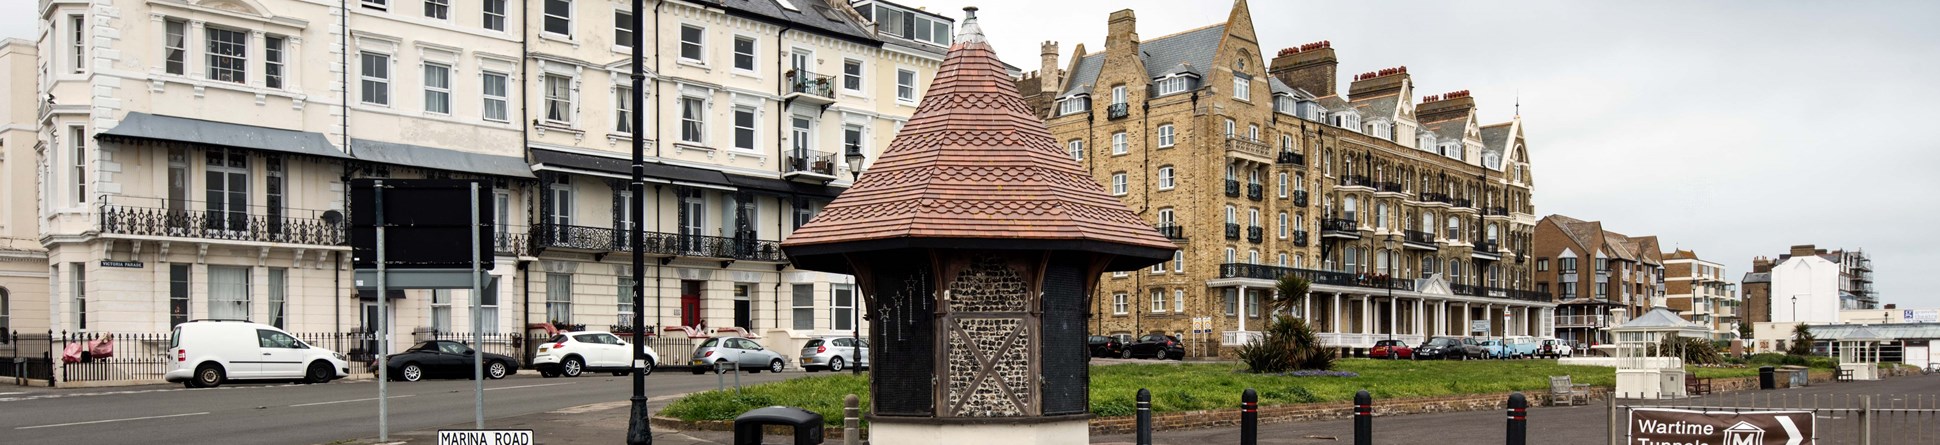 Timber framed octagonal kiosk on Ramsgate seafront with terrace of buildings in the background